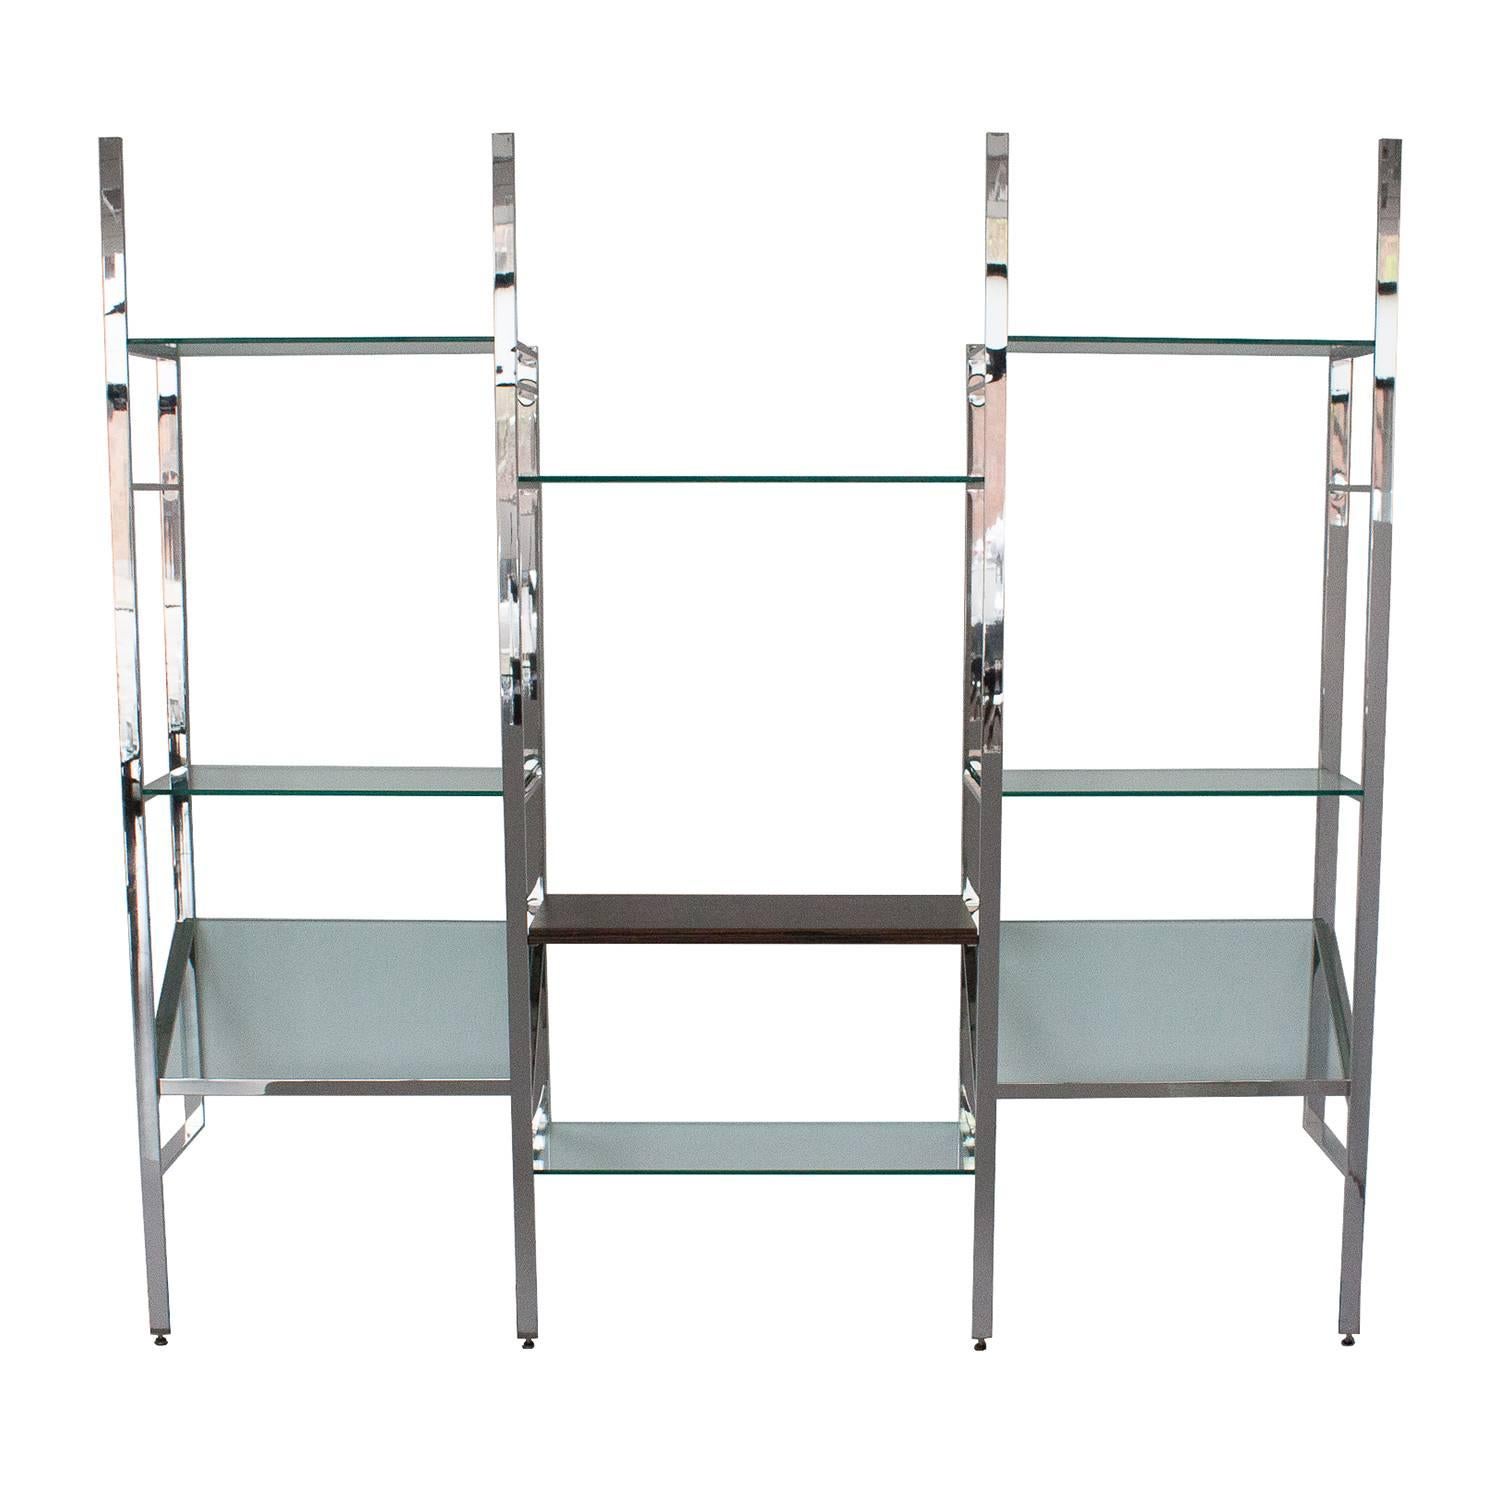 Mid-Century Modern Milo Baughman Chrome and Glass Wall-Mounted Shelving System